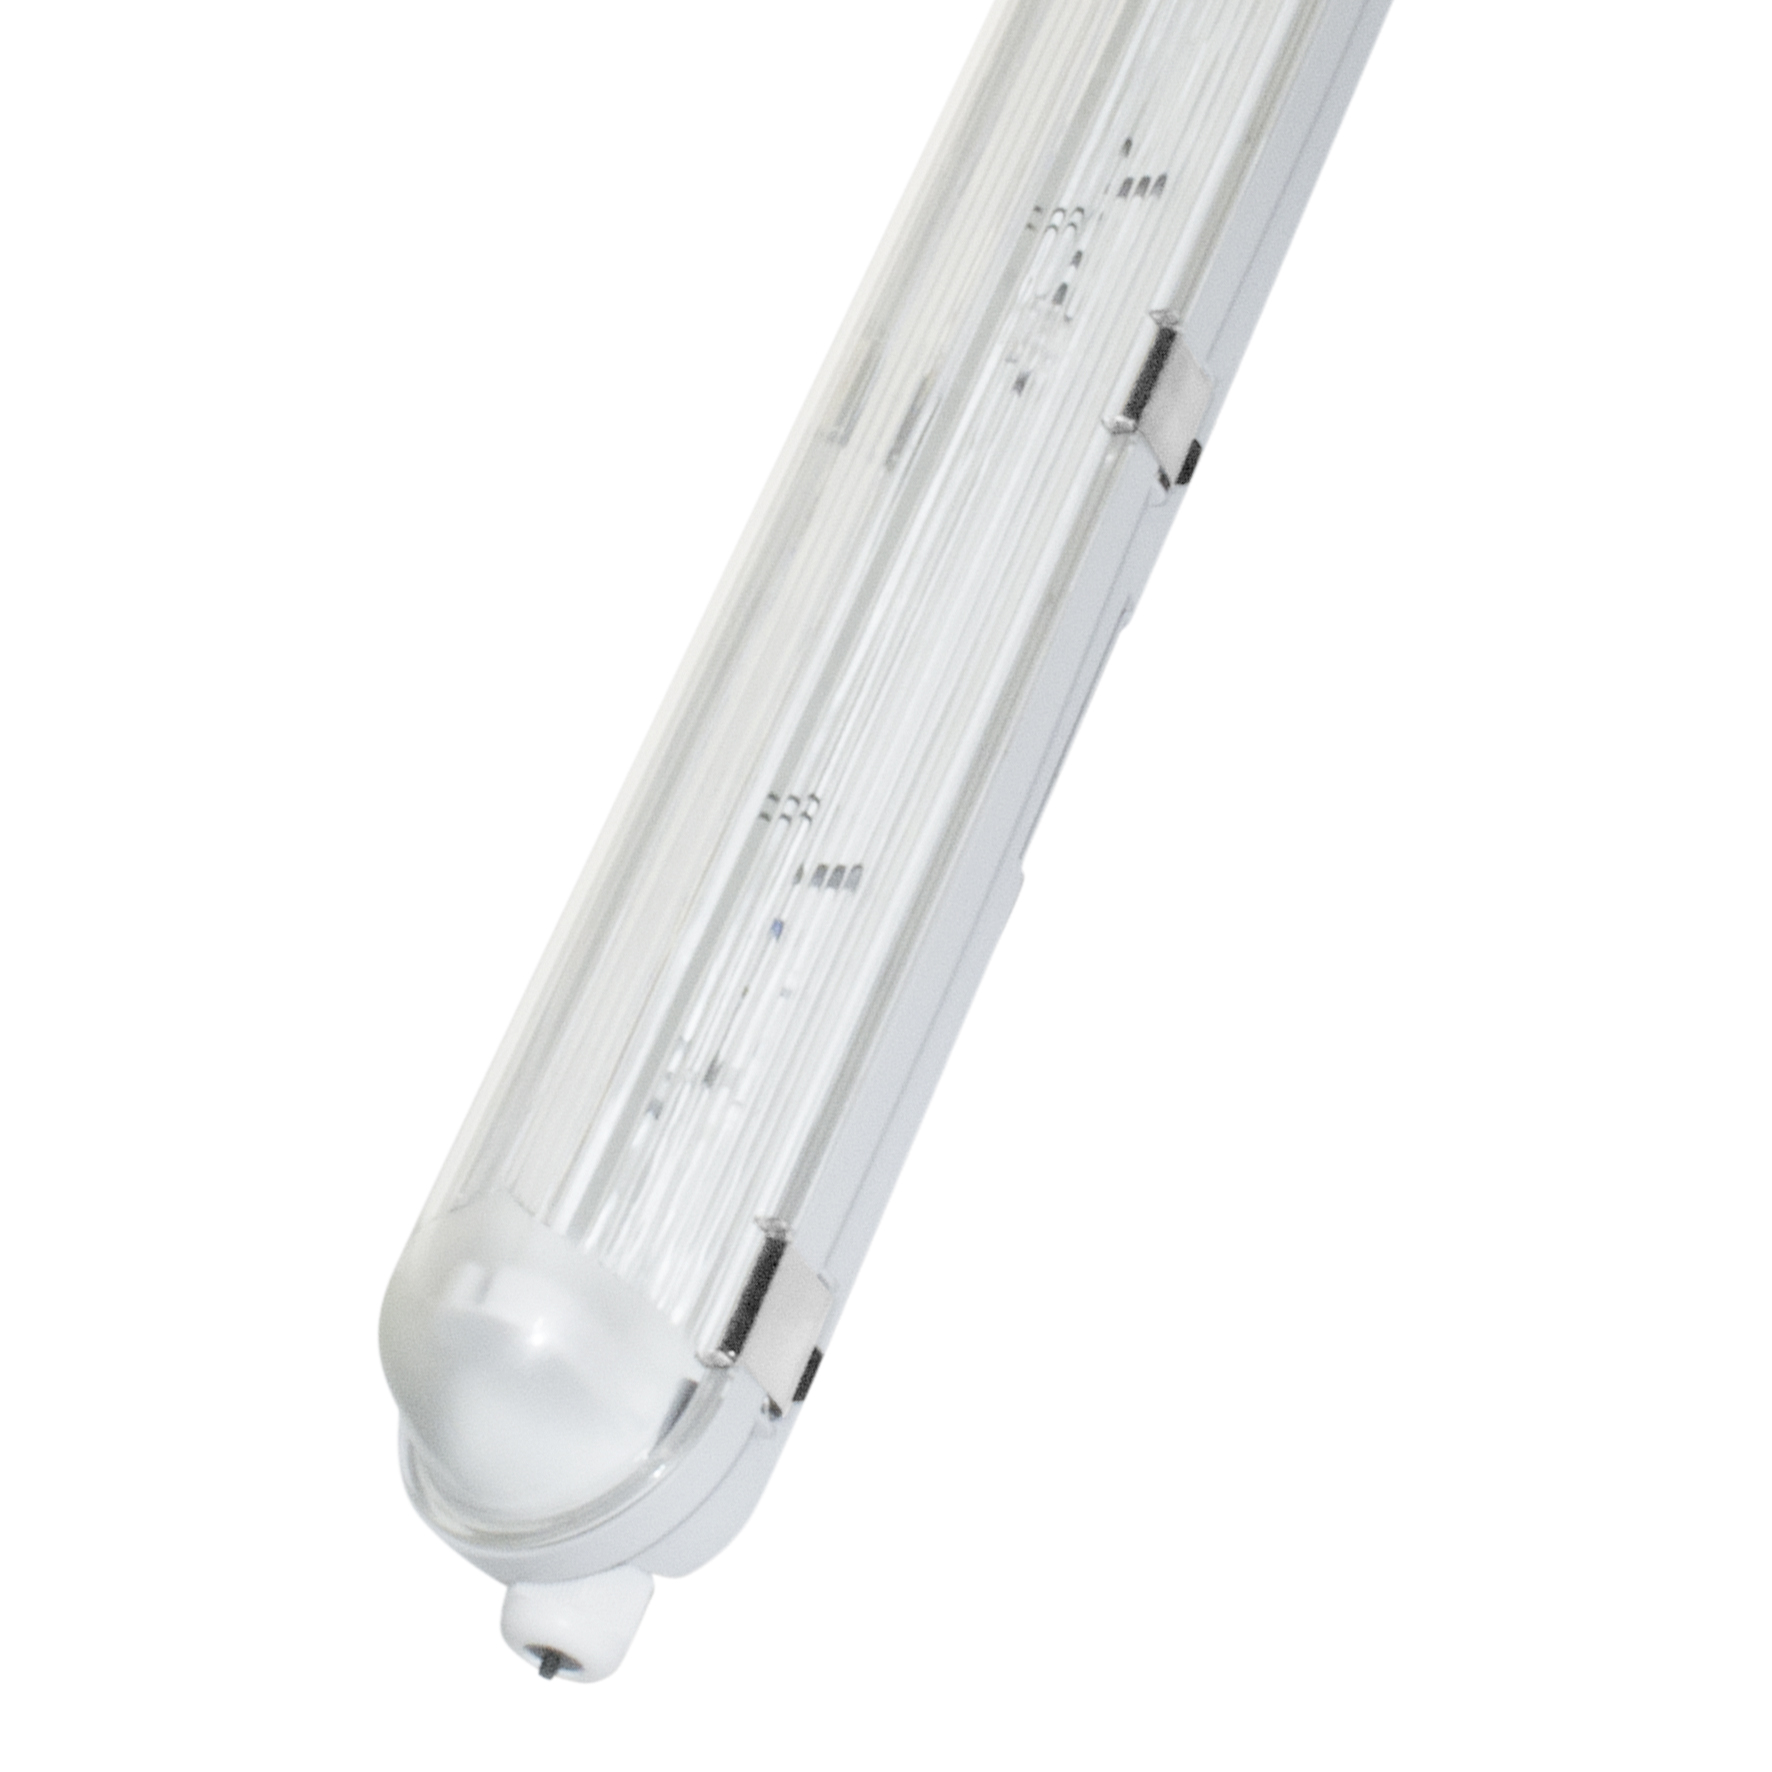 TUN LED Mariner Twin 1500mm Body (without lamps)